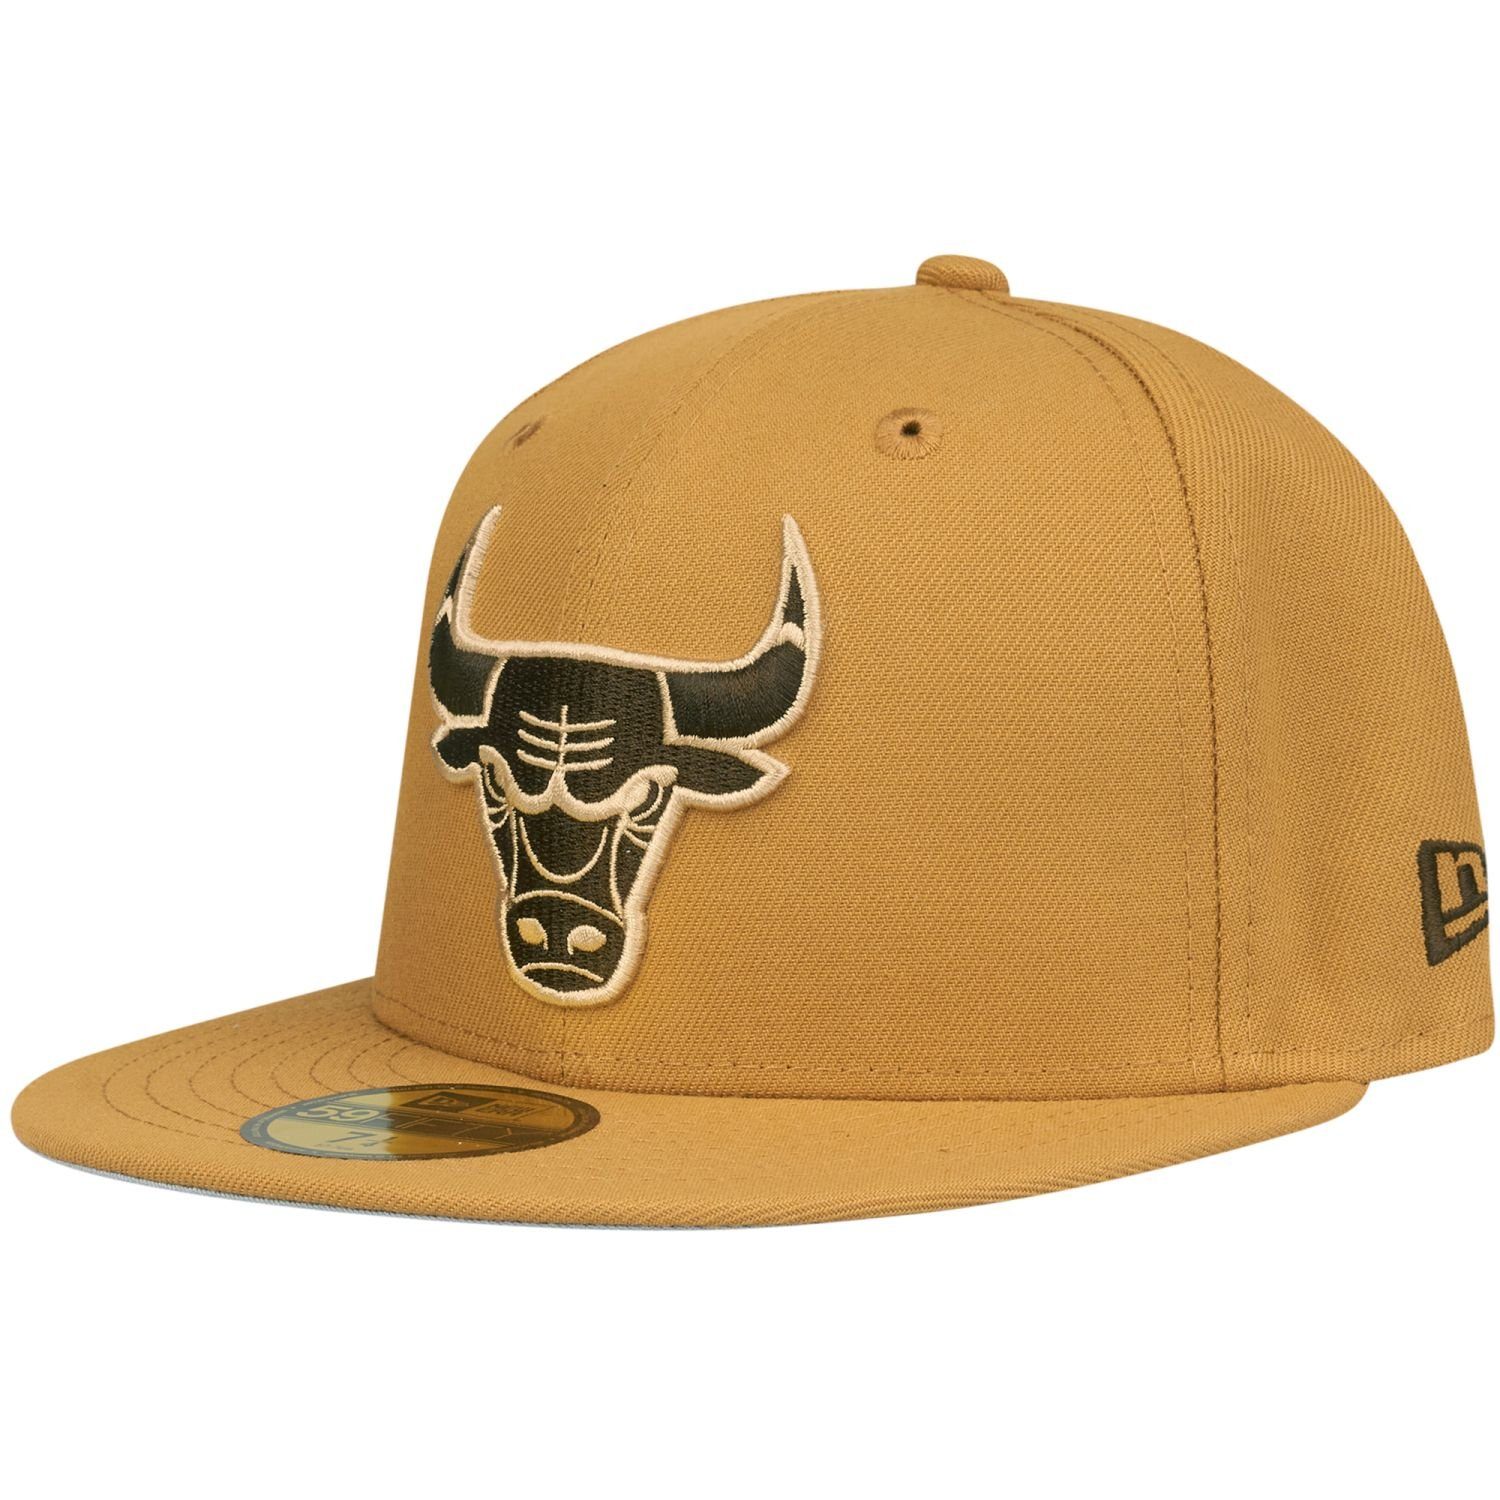 Fitted Cap New Bulls Era 59Fifty NBA Chicago